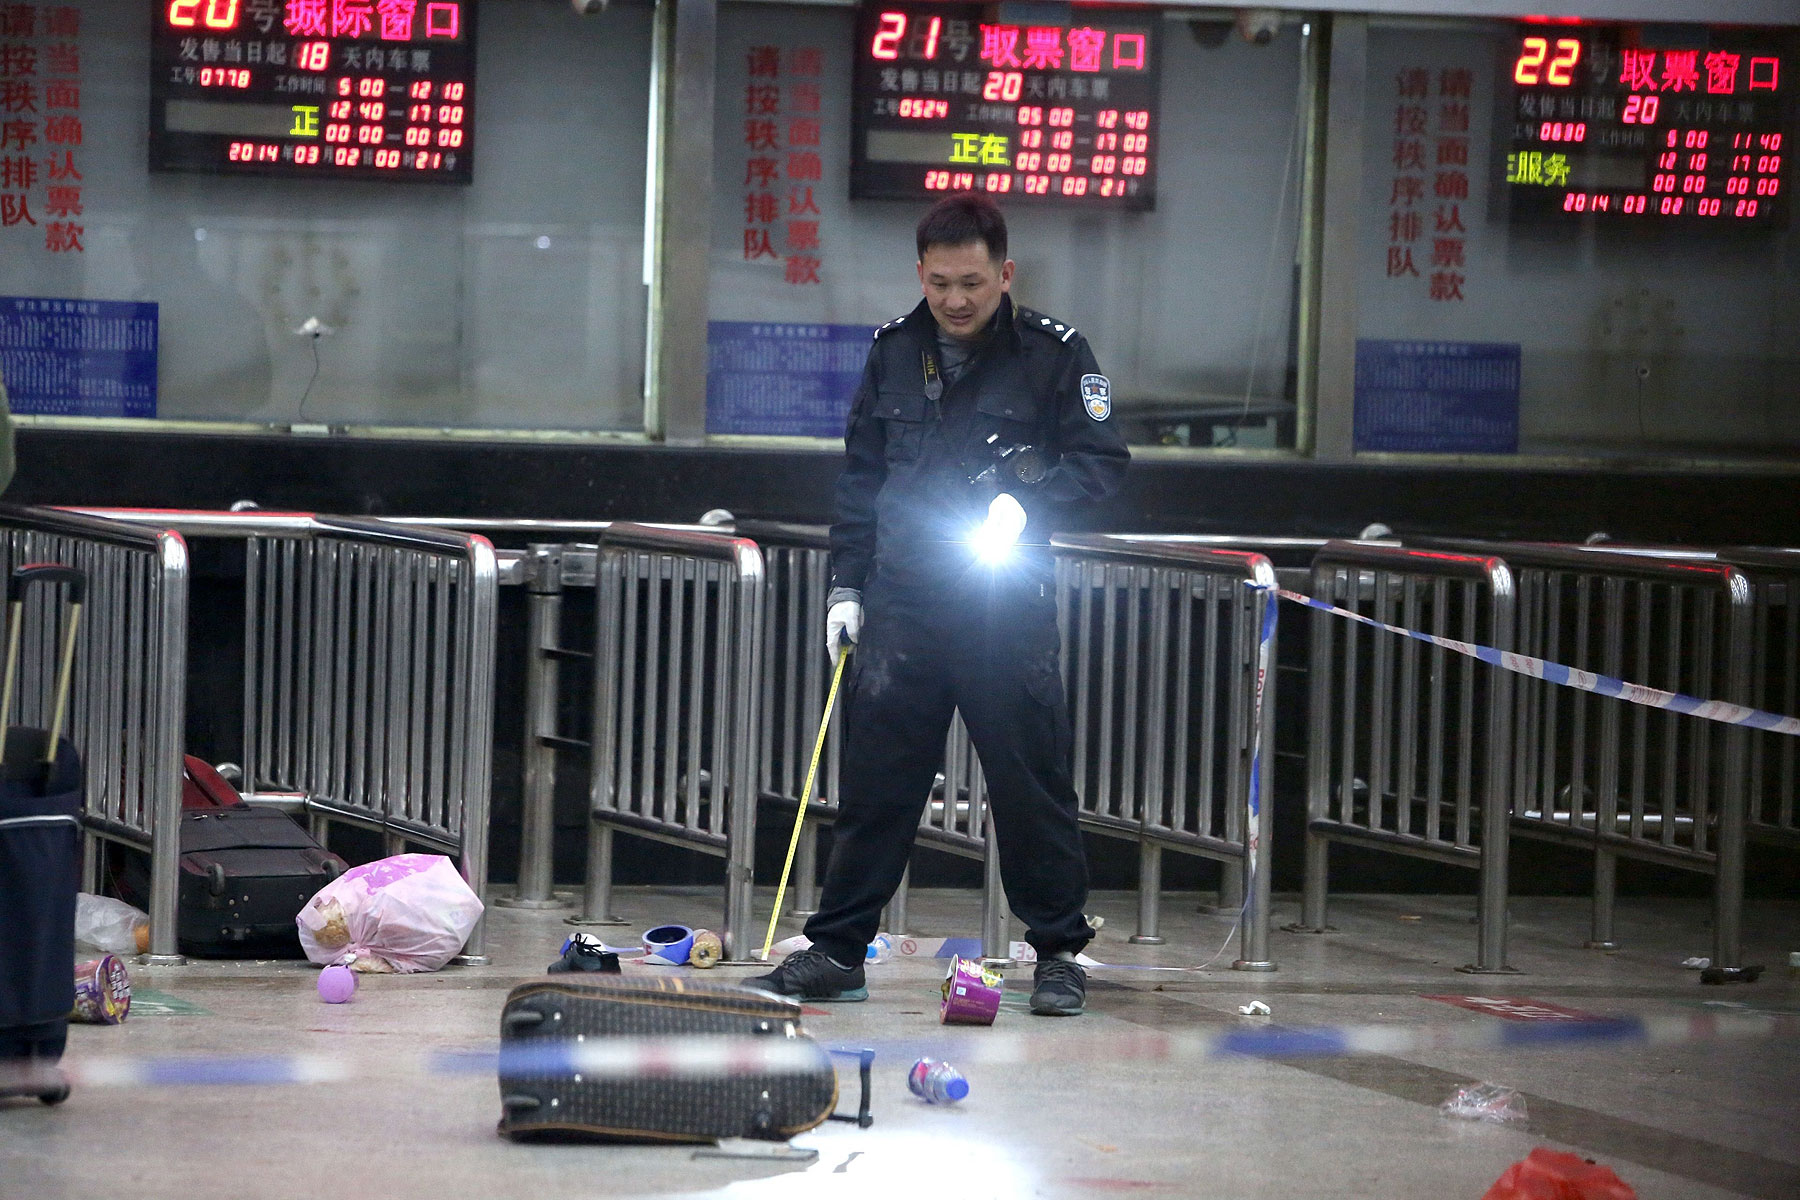 A Chinese police investigator in Kunming’s railway station after the March 1 mass knifings that killed 29 people and injured scores (AFP / Getty Images)